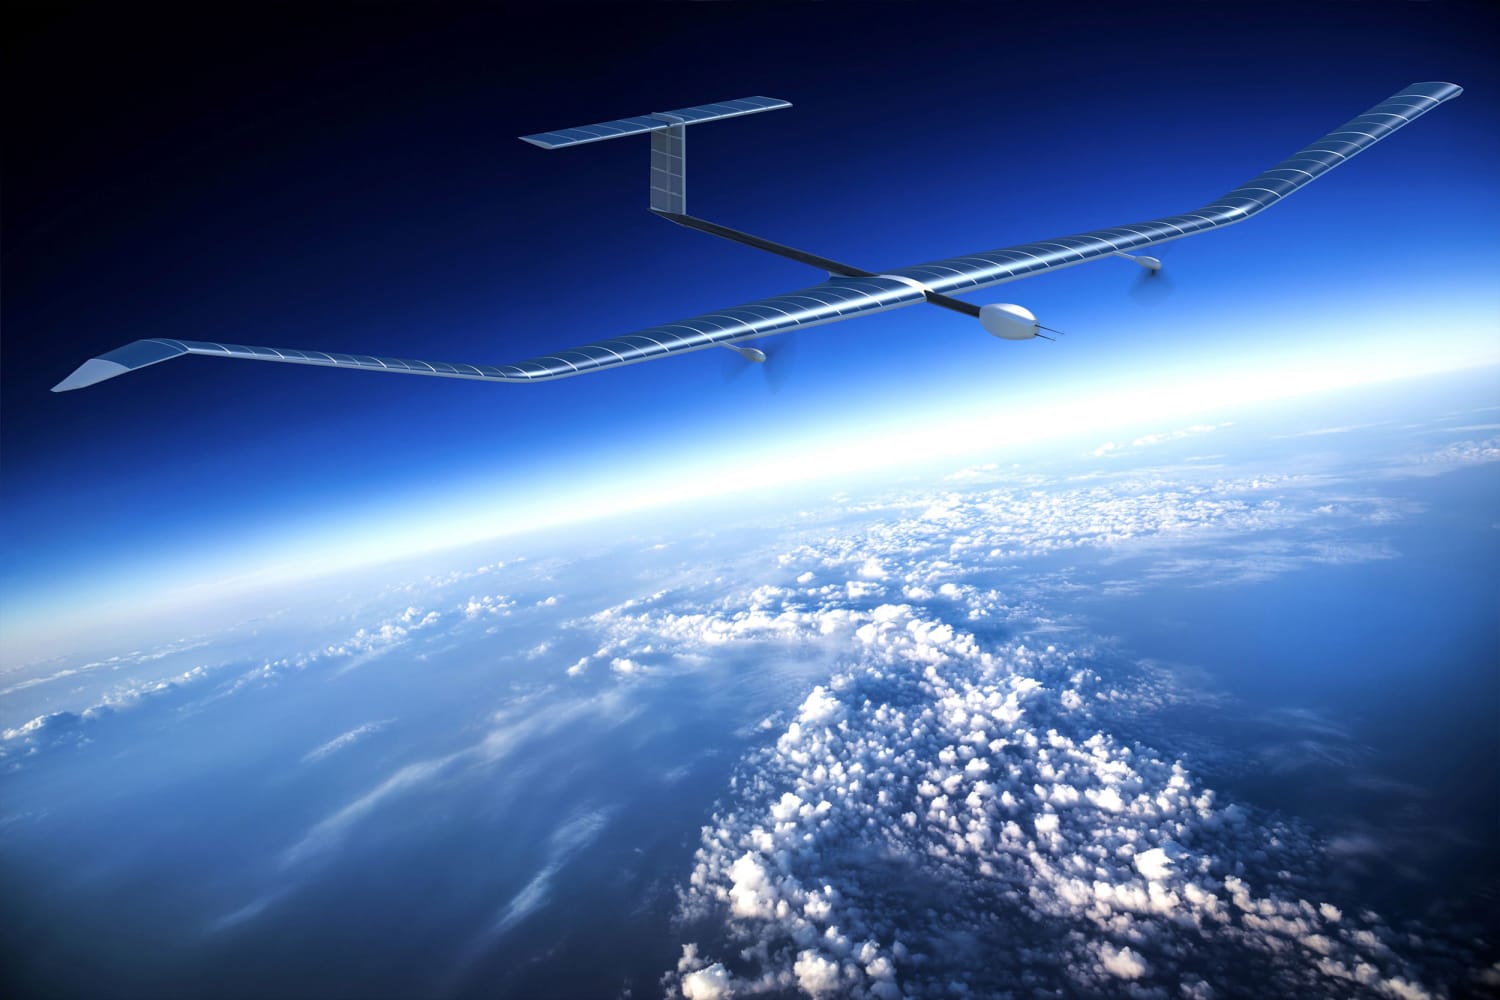 This 'pseudo-satellite' drone can fly 70,000 feet up in the sky